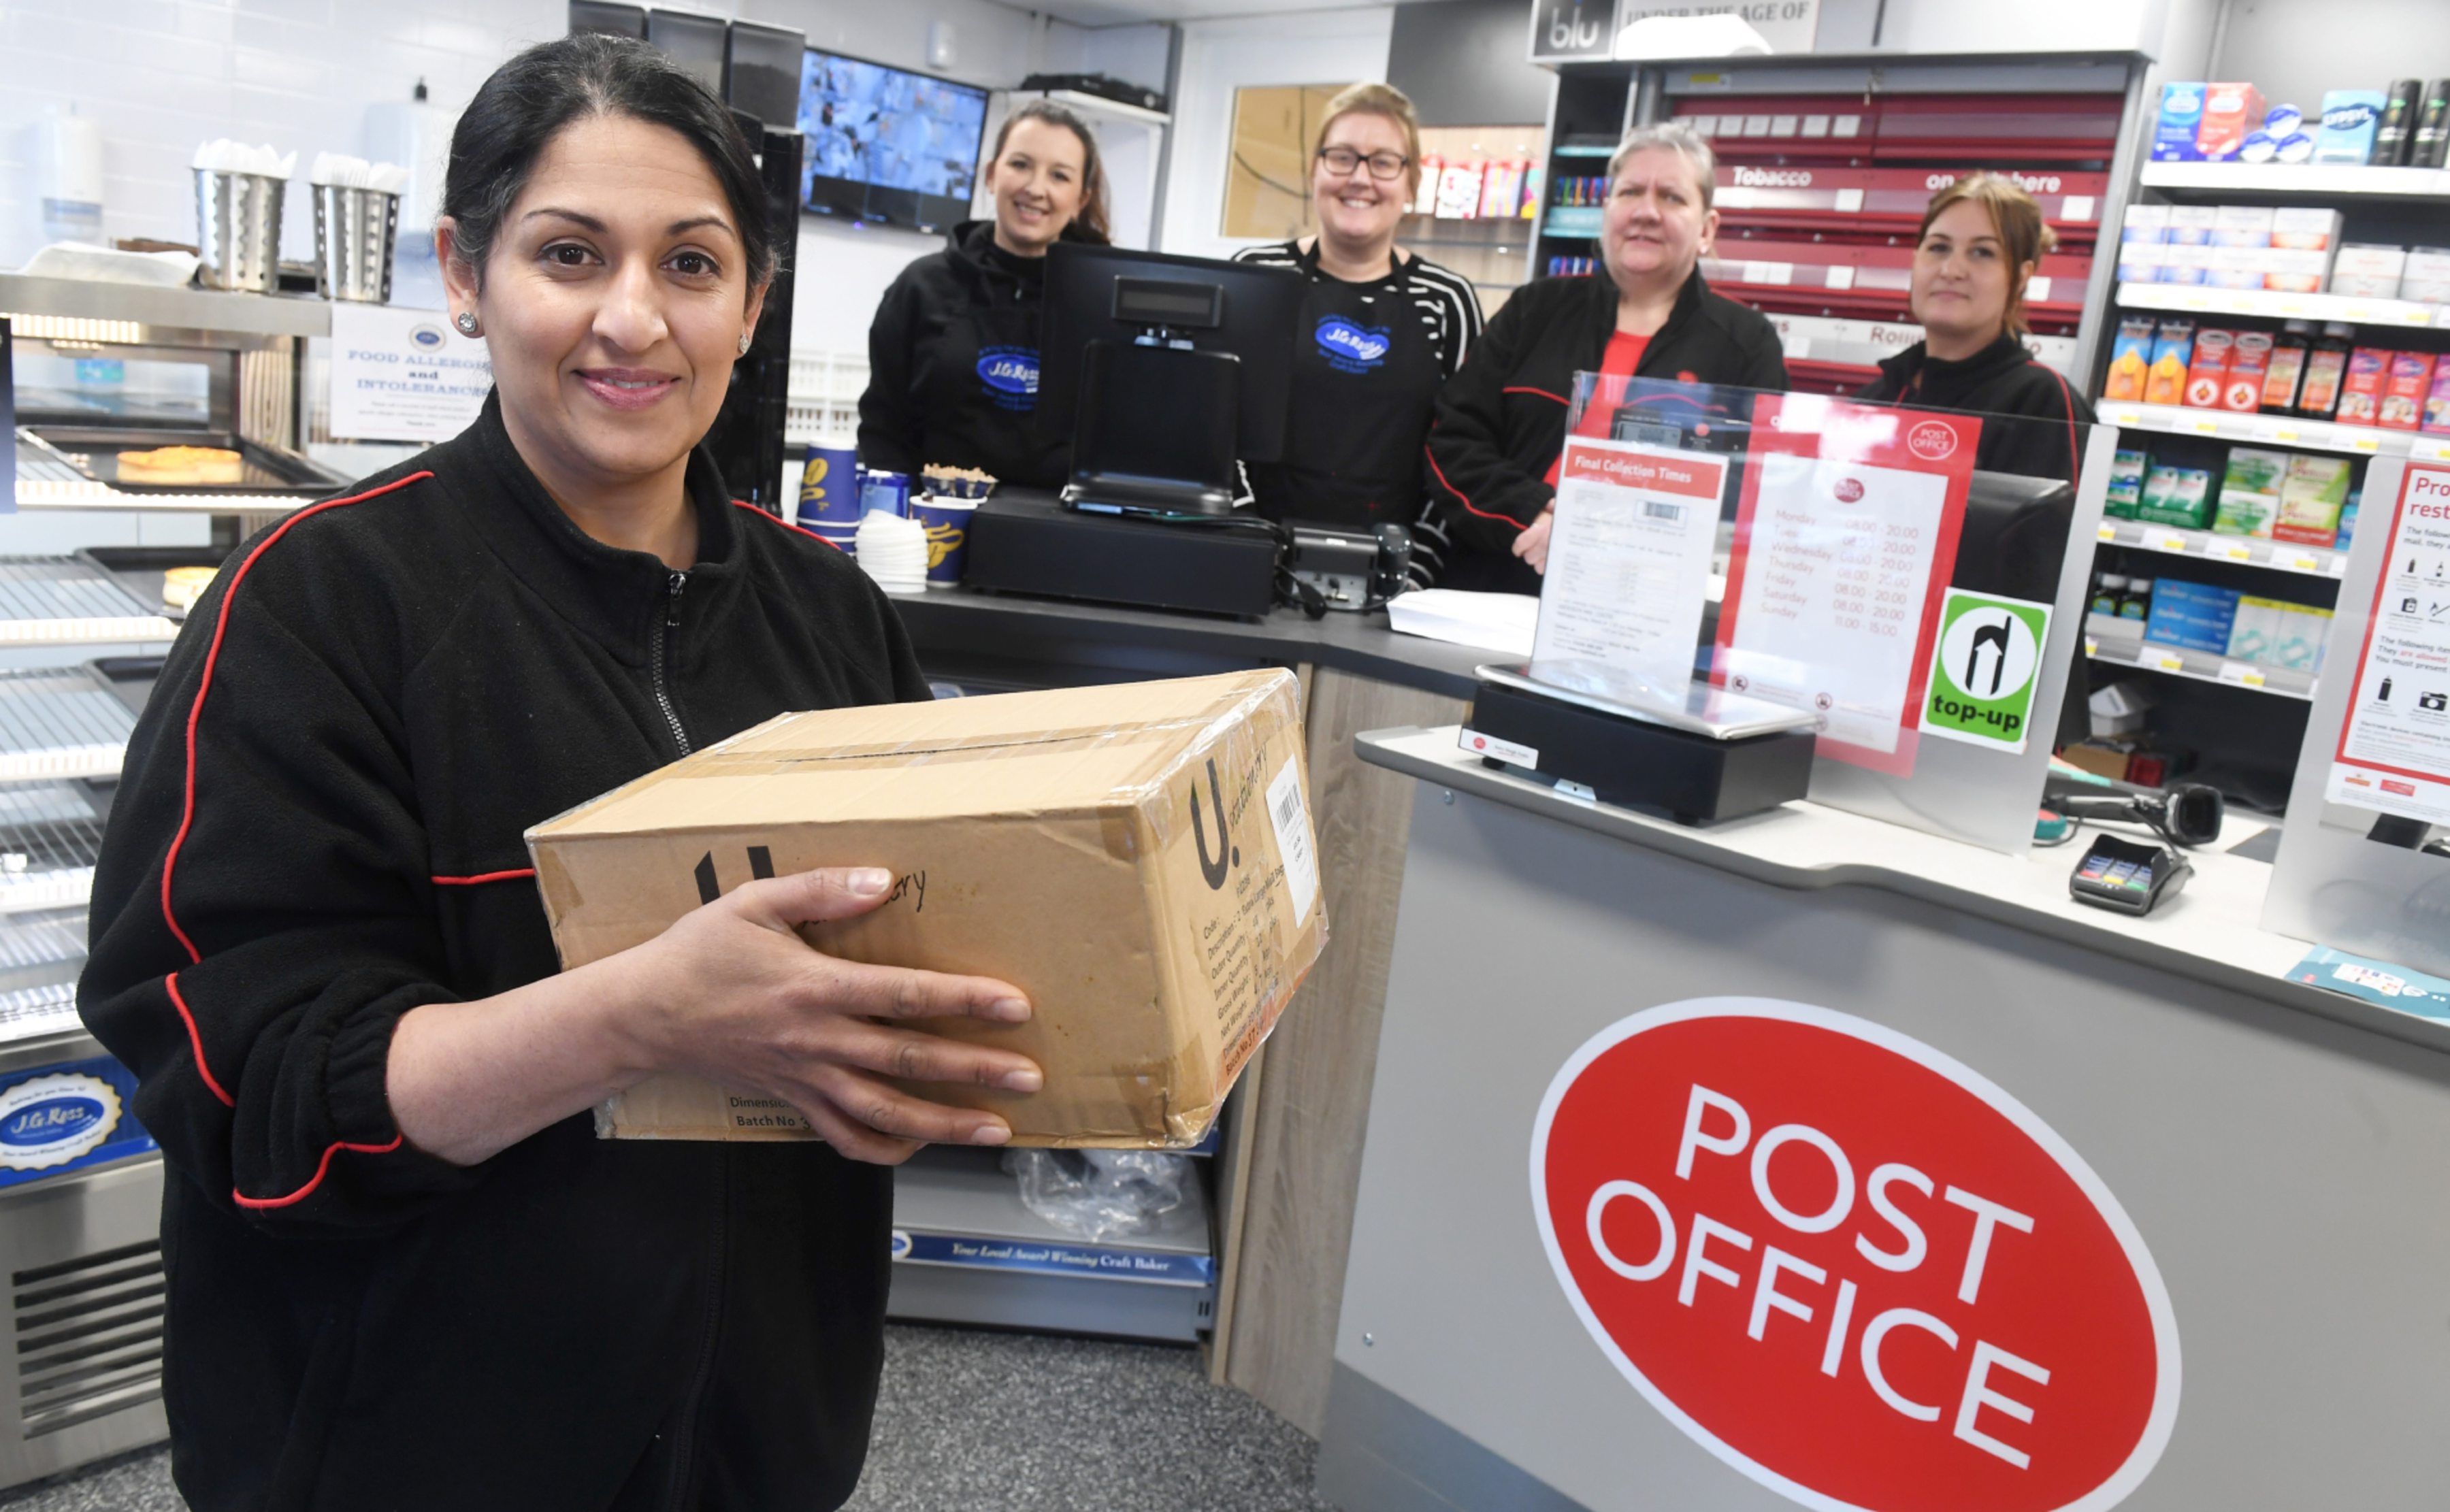 A new post office in Woodside has opened on the site of the old Chalmers bakery.
The Post Office also has a JG Ross bakers outlet and is Premier Stores.
Pictured is Sal Ahmad cor the owner, front, with staff from left, Sharon Howieson and Dianne Smith cor from JG Ross and Fiona Smith and Laura Robertson from the Post office.
Pic by Chris Sumner
Taken 11/2/19